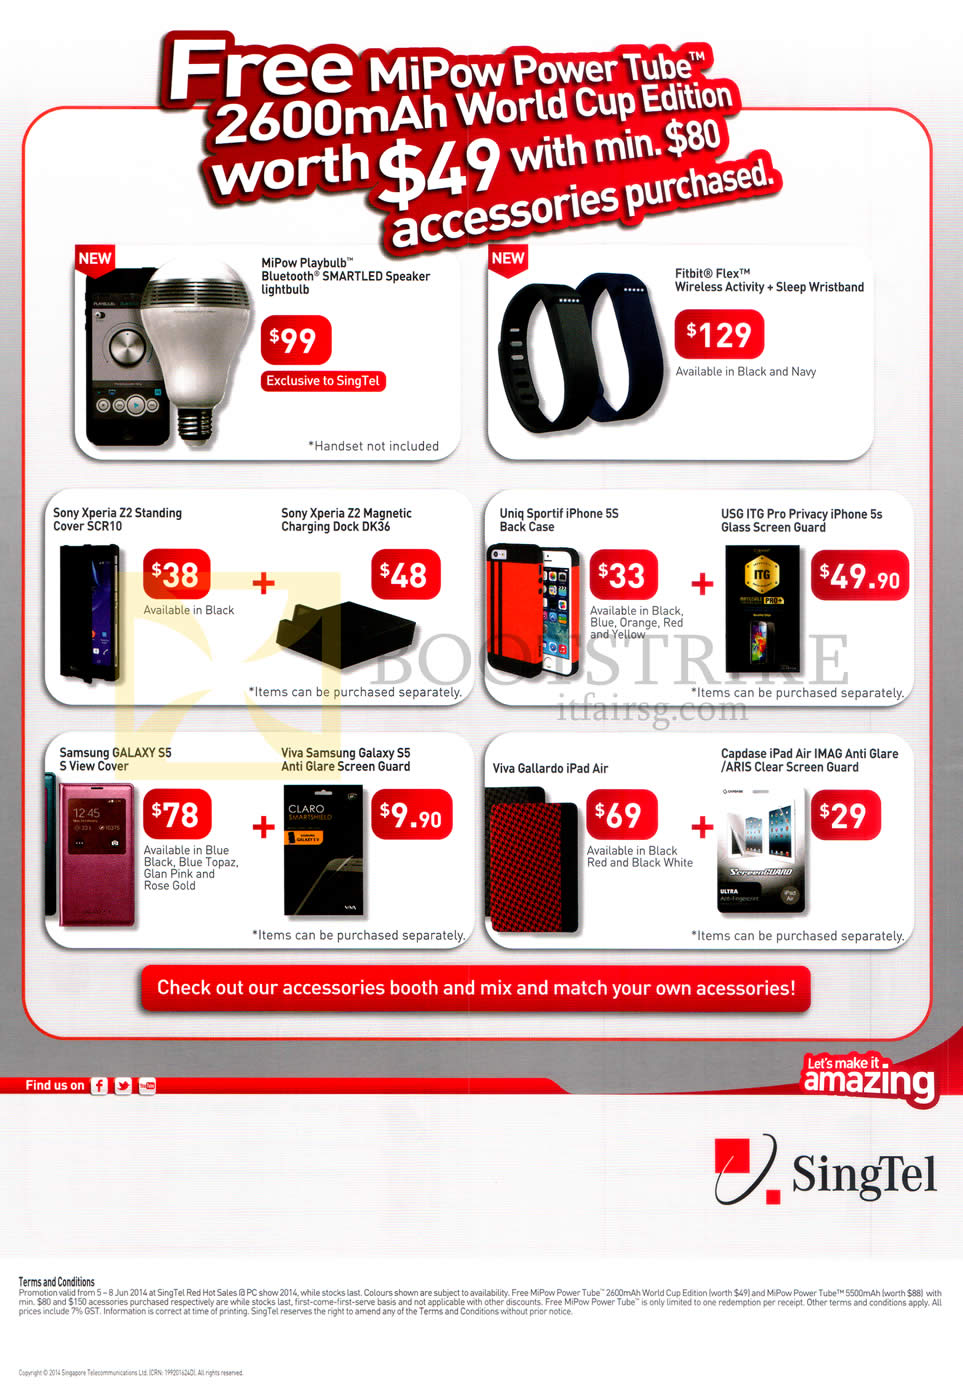 PC SHOW 2014 price list image brochure of Singtel Accessories MiPow Playbulb, Fitbit Flex, Sony Xperia Case, Charging Dock, Samsung Galaxy S5 S View Cover